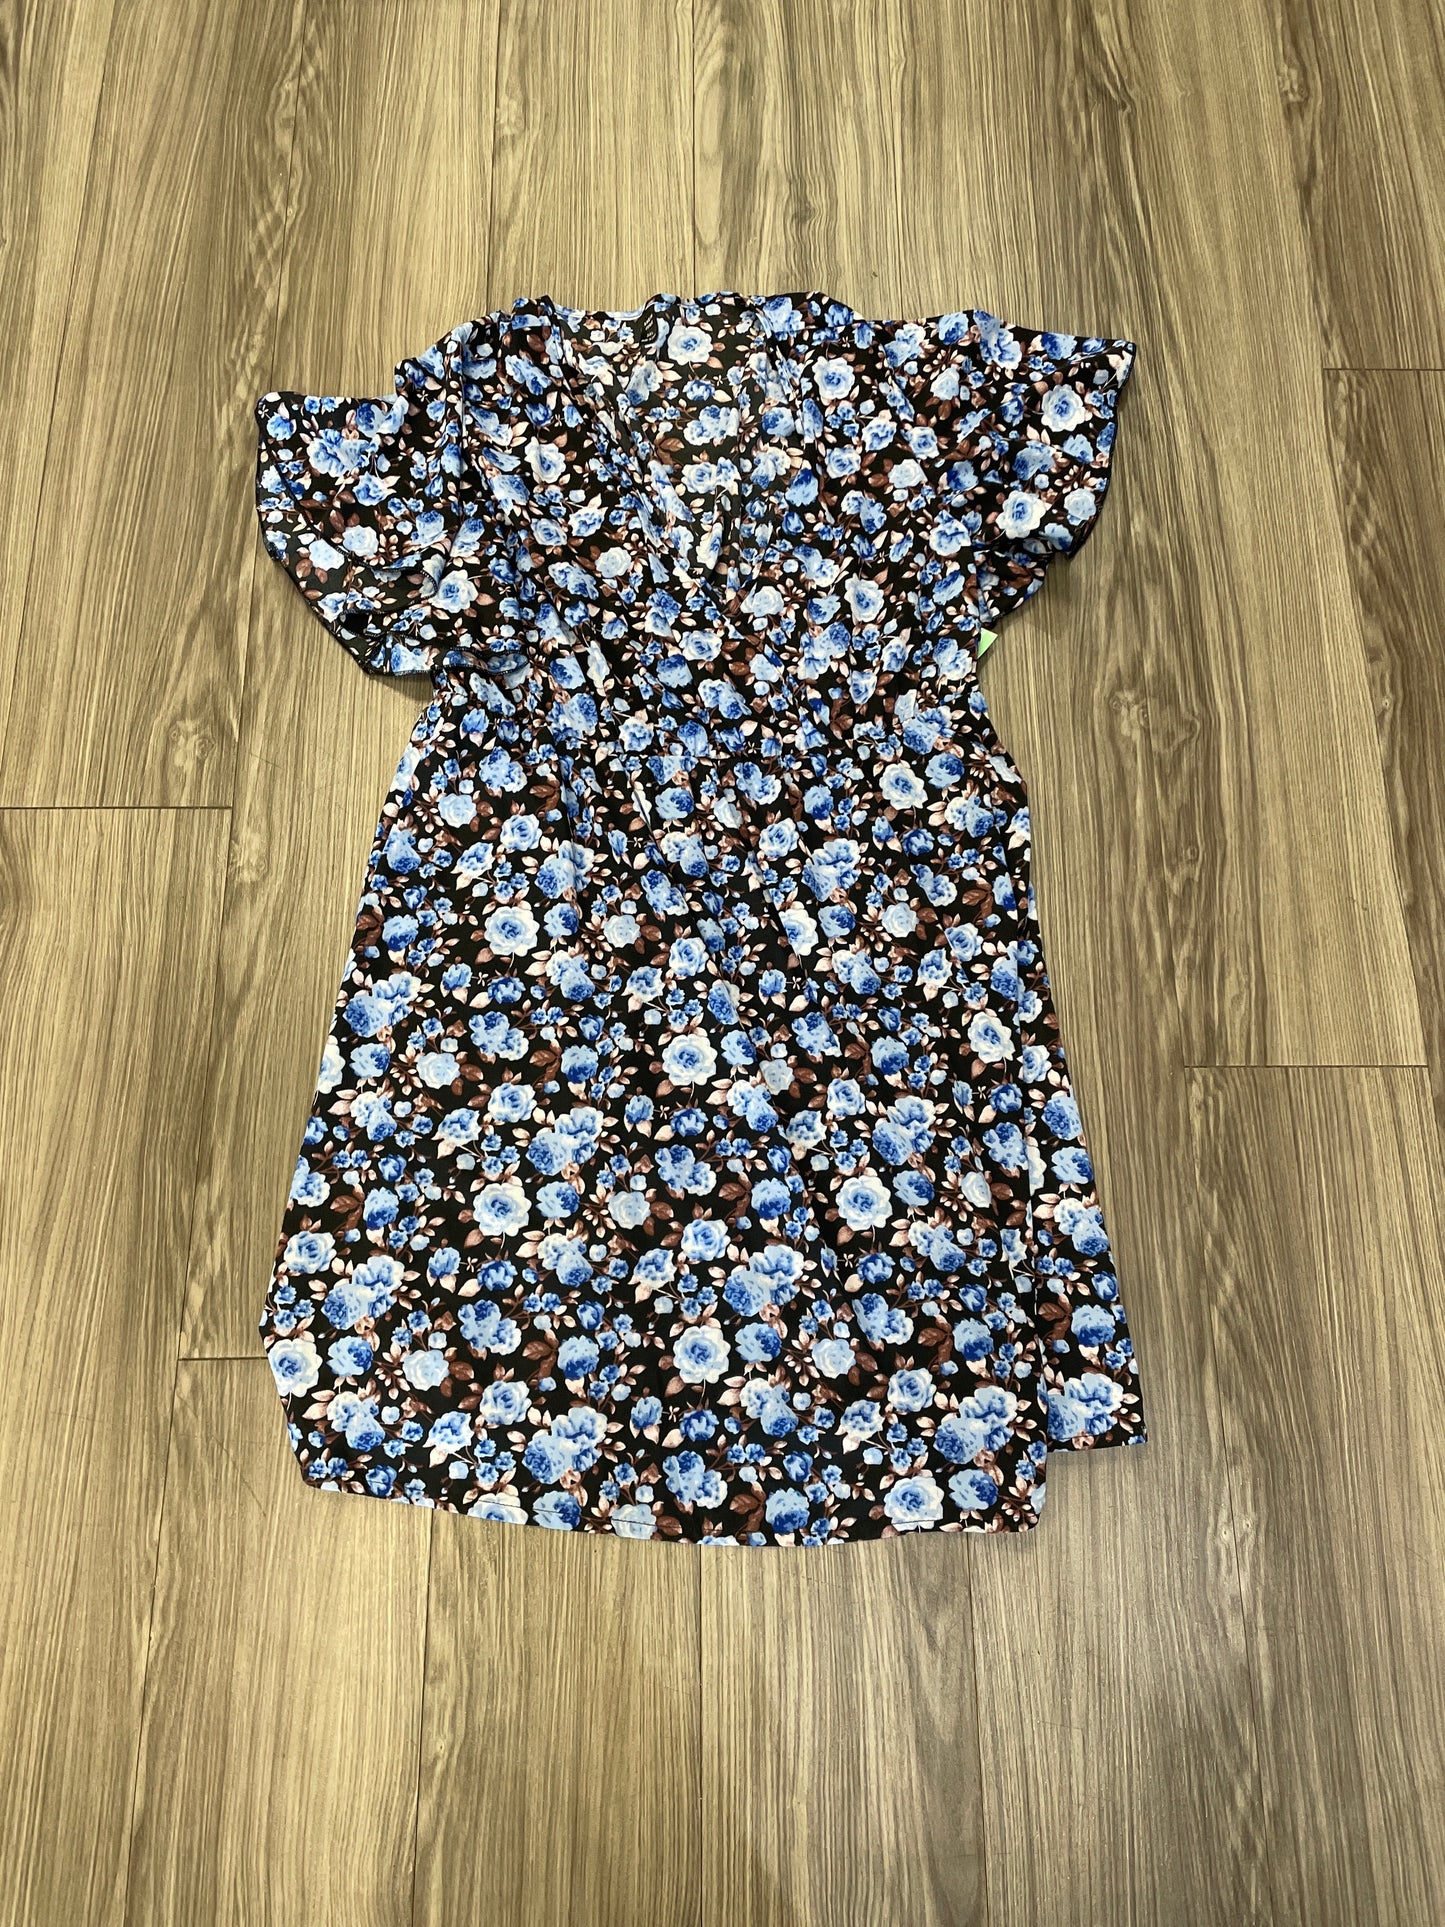 Floral Print Dress Casual Short Shein, Size 3x